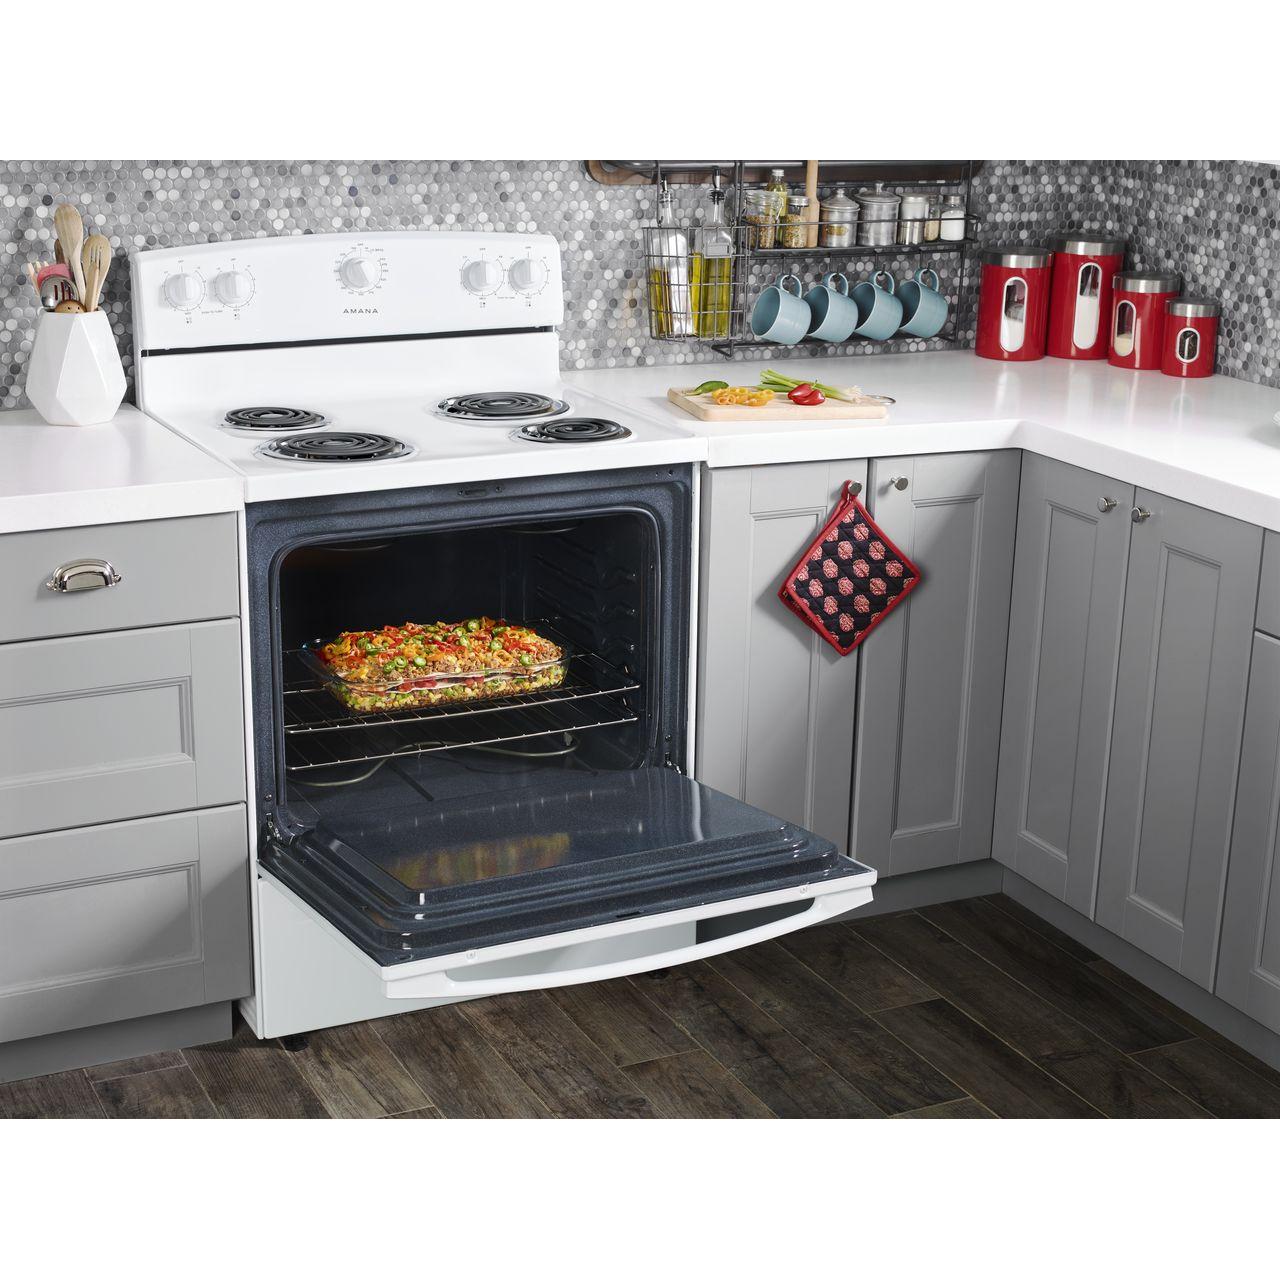 Amana 30-inch Freestanding Electric Range with Temp Assure? cooking system ACR2303MFW